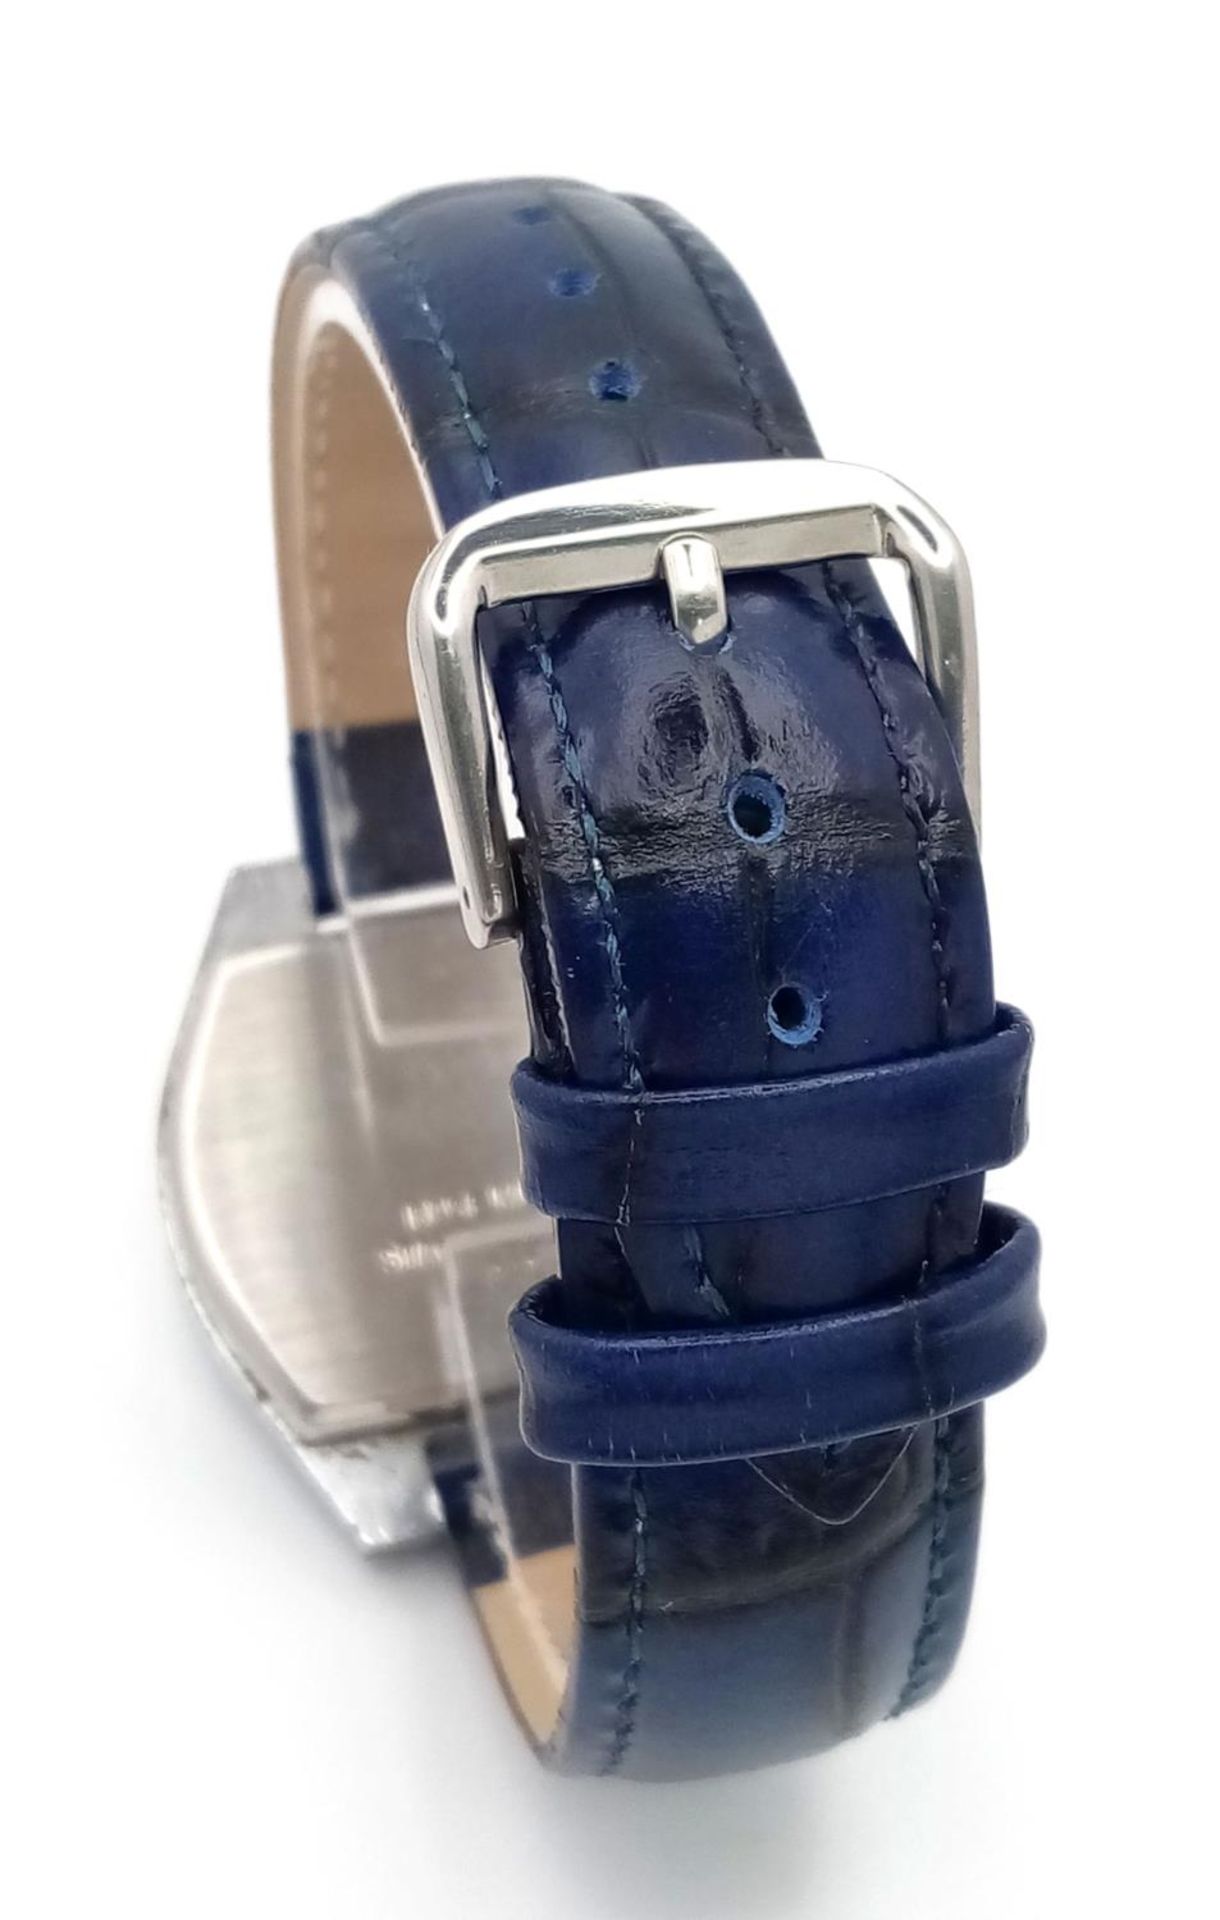 A Vintage Ingersoll Jump Watch. Blue leather strap. Stainless steel case - 38mm. Metallic grey - Image 6 of 6